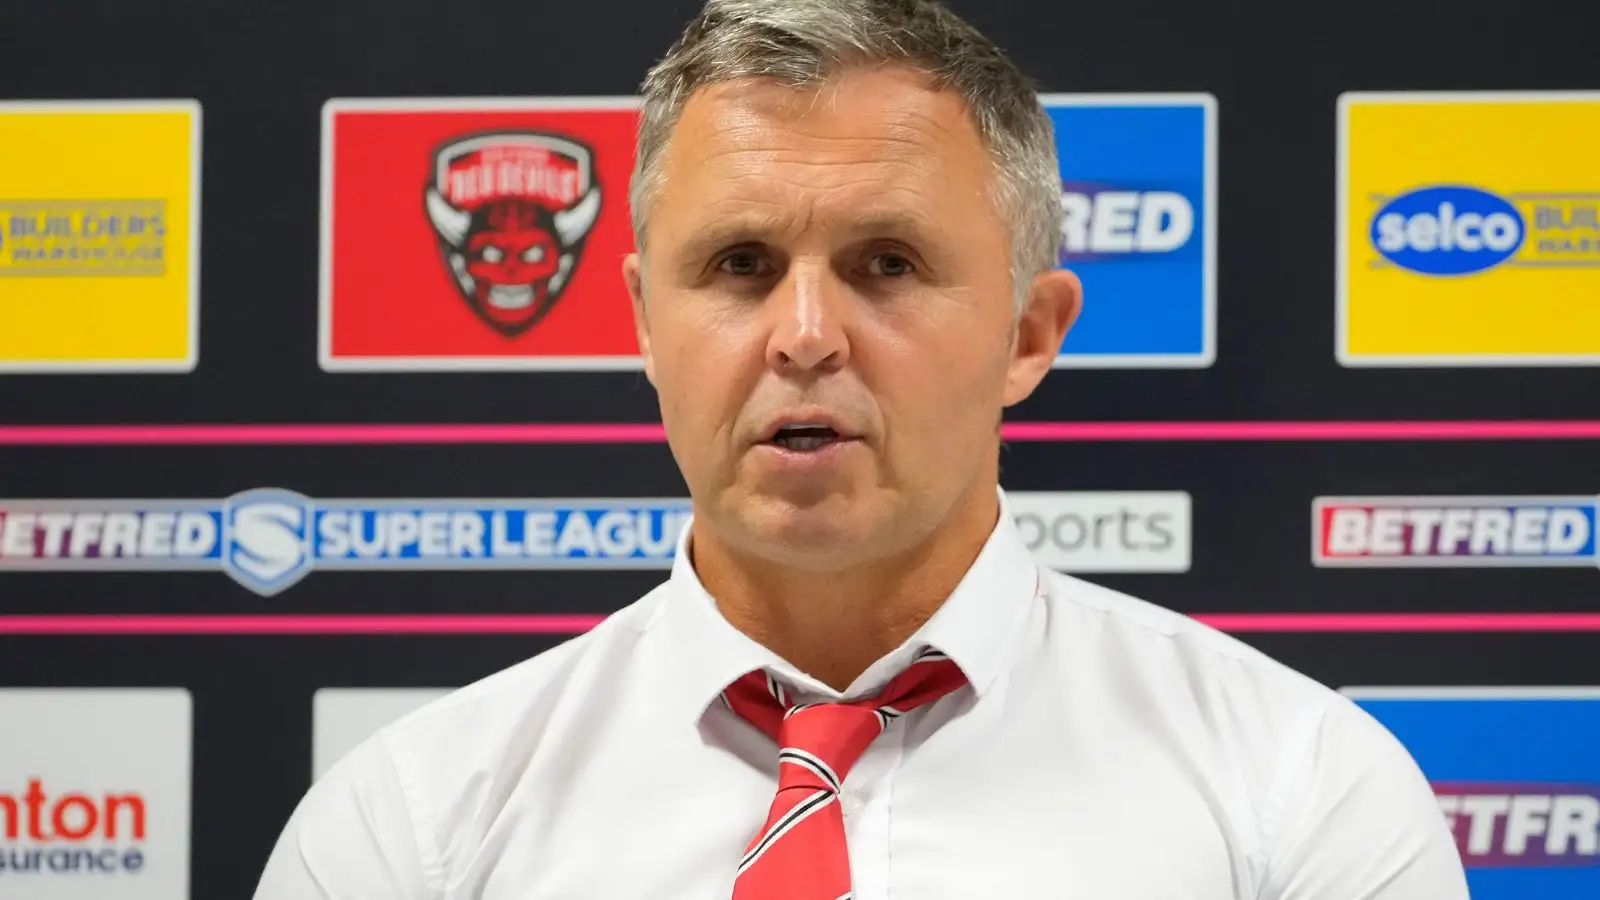 Salford boss Paul Rowley launches scathing attack on officials; says sport will ‘probably lose fans’